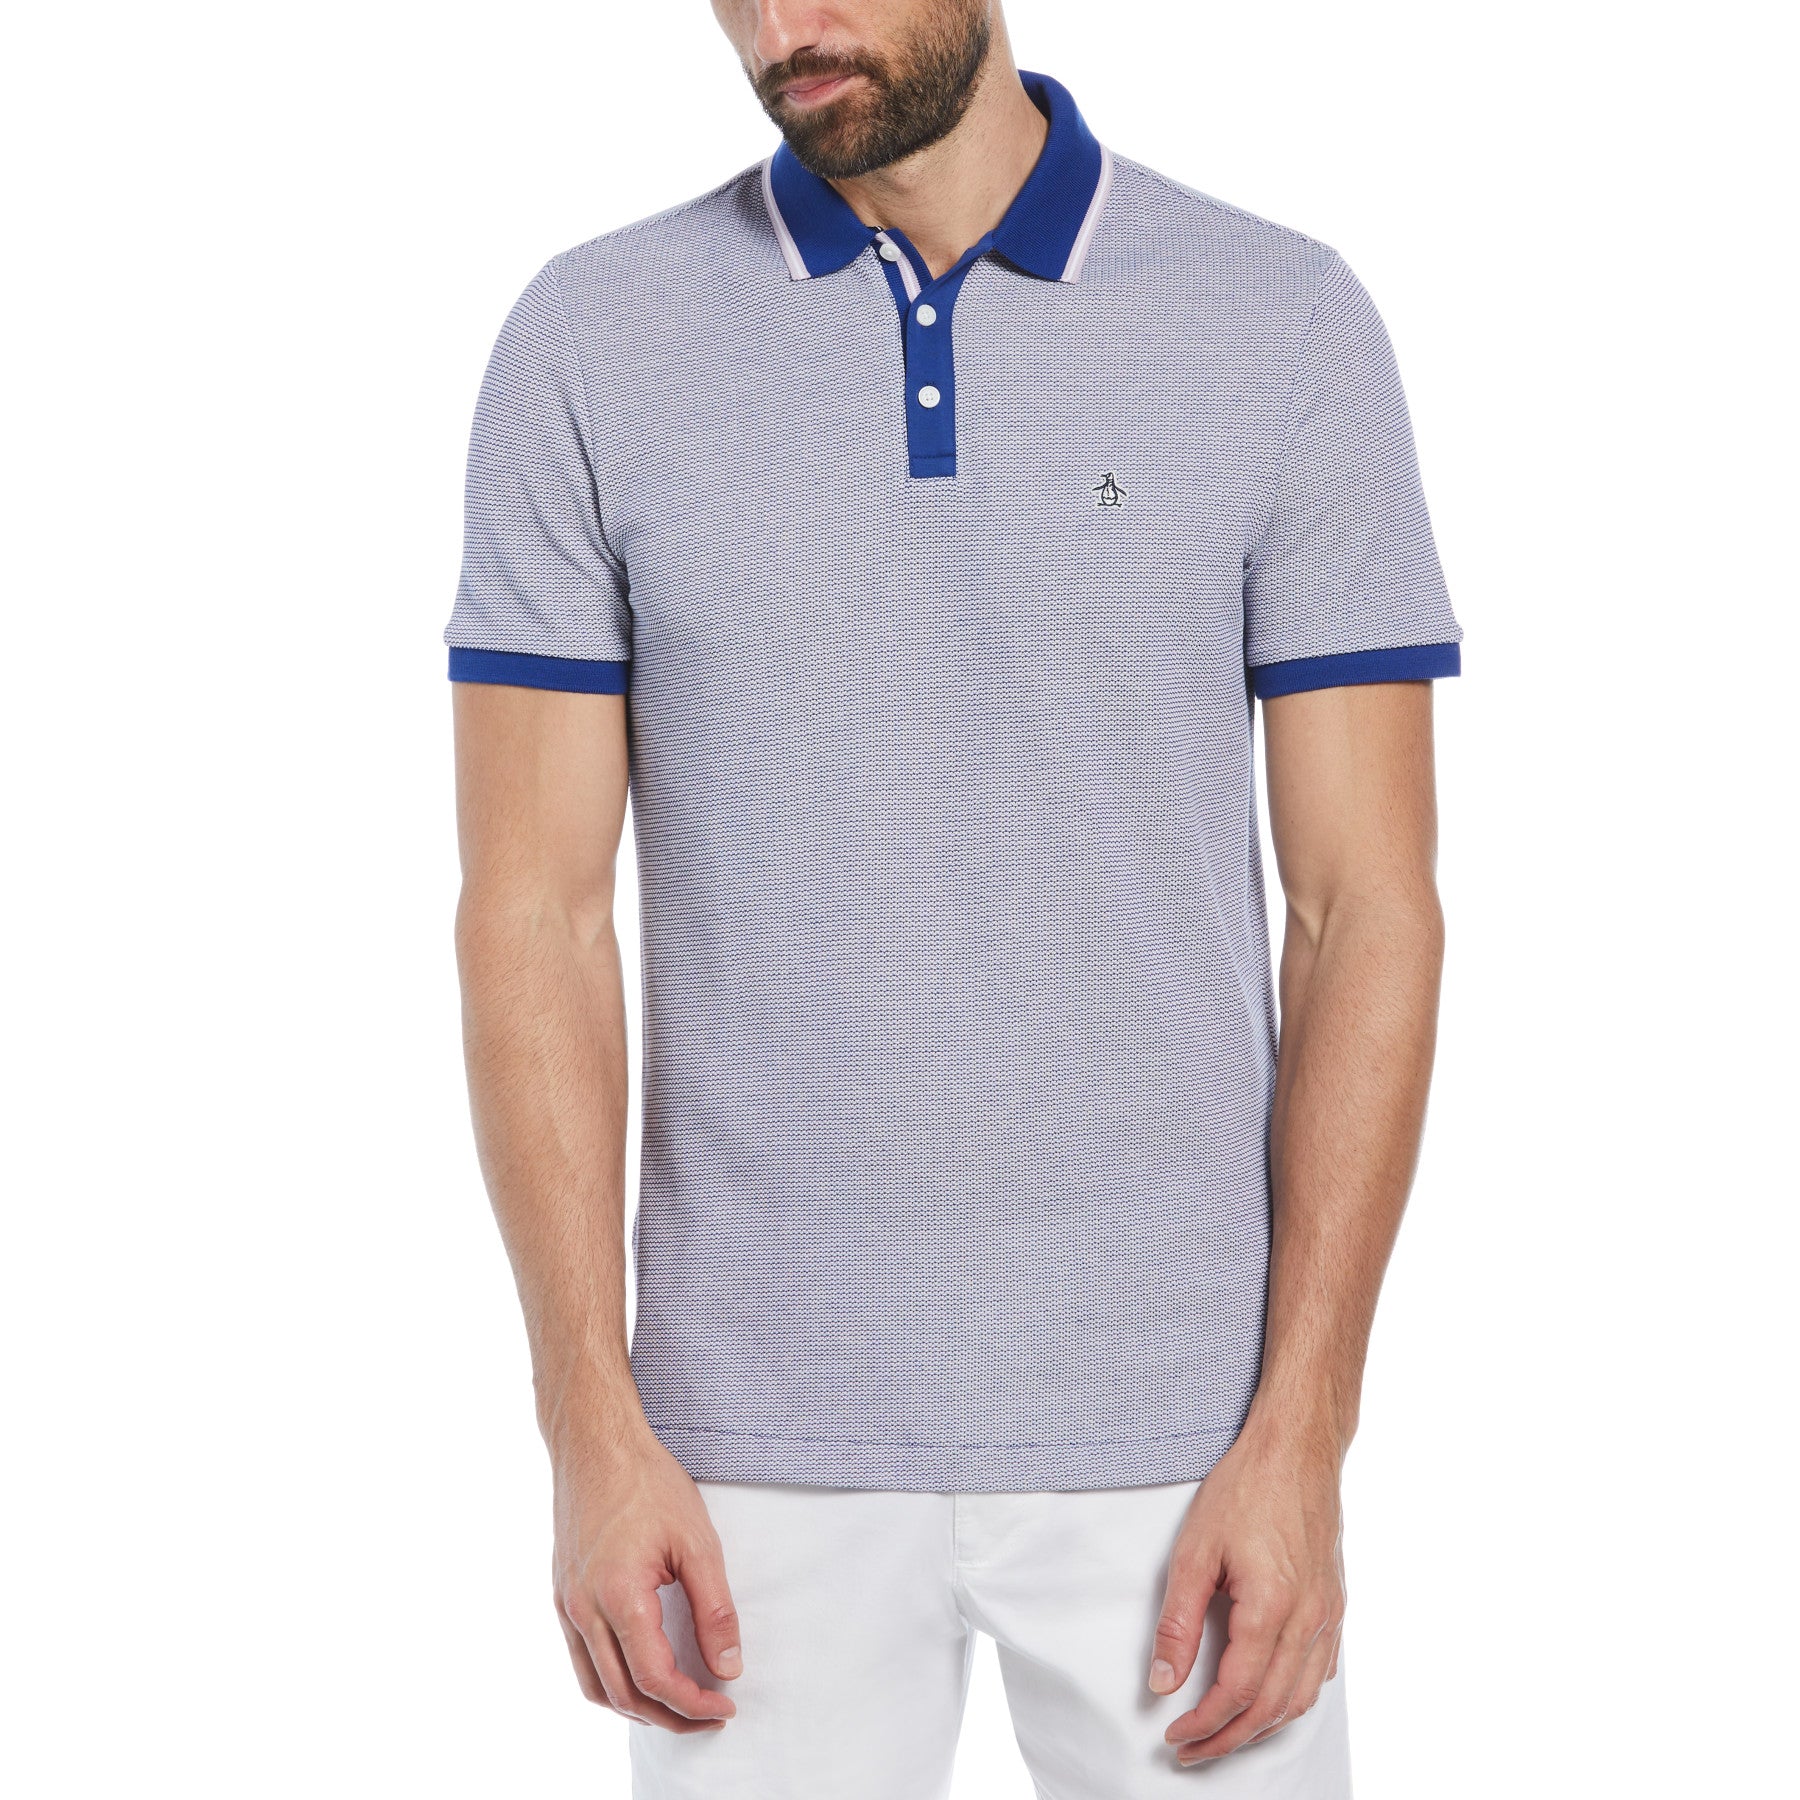 View Birdseye Pique Short Sleeve Polo Shirt In Lavender Frost information